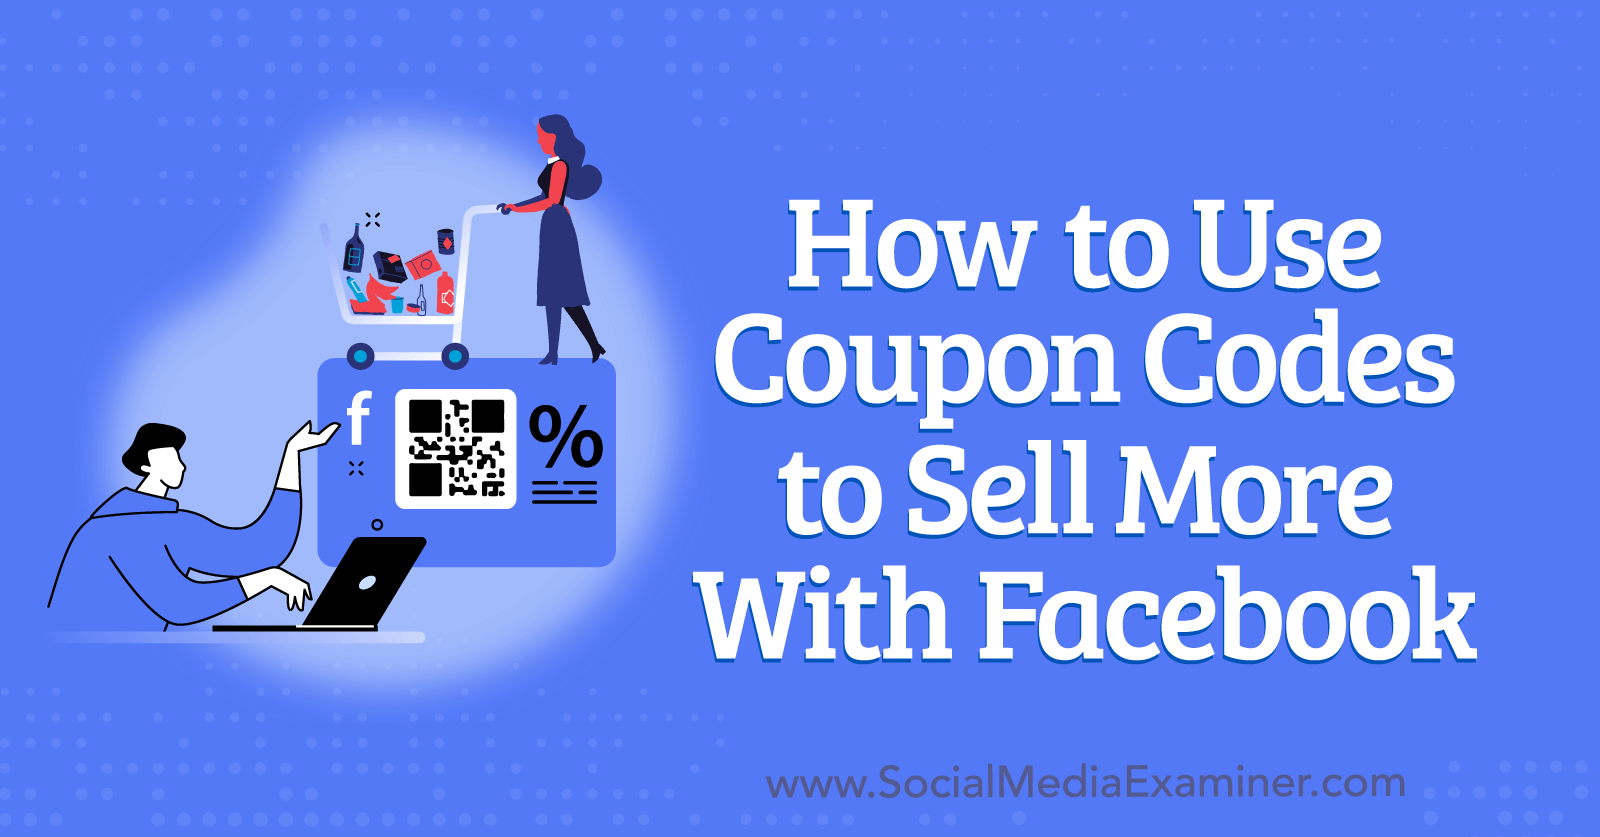 How to Use Coupon Codes to Sell More With Facebook Social Media Examiner